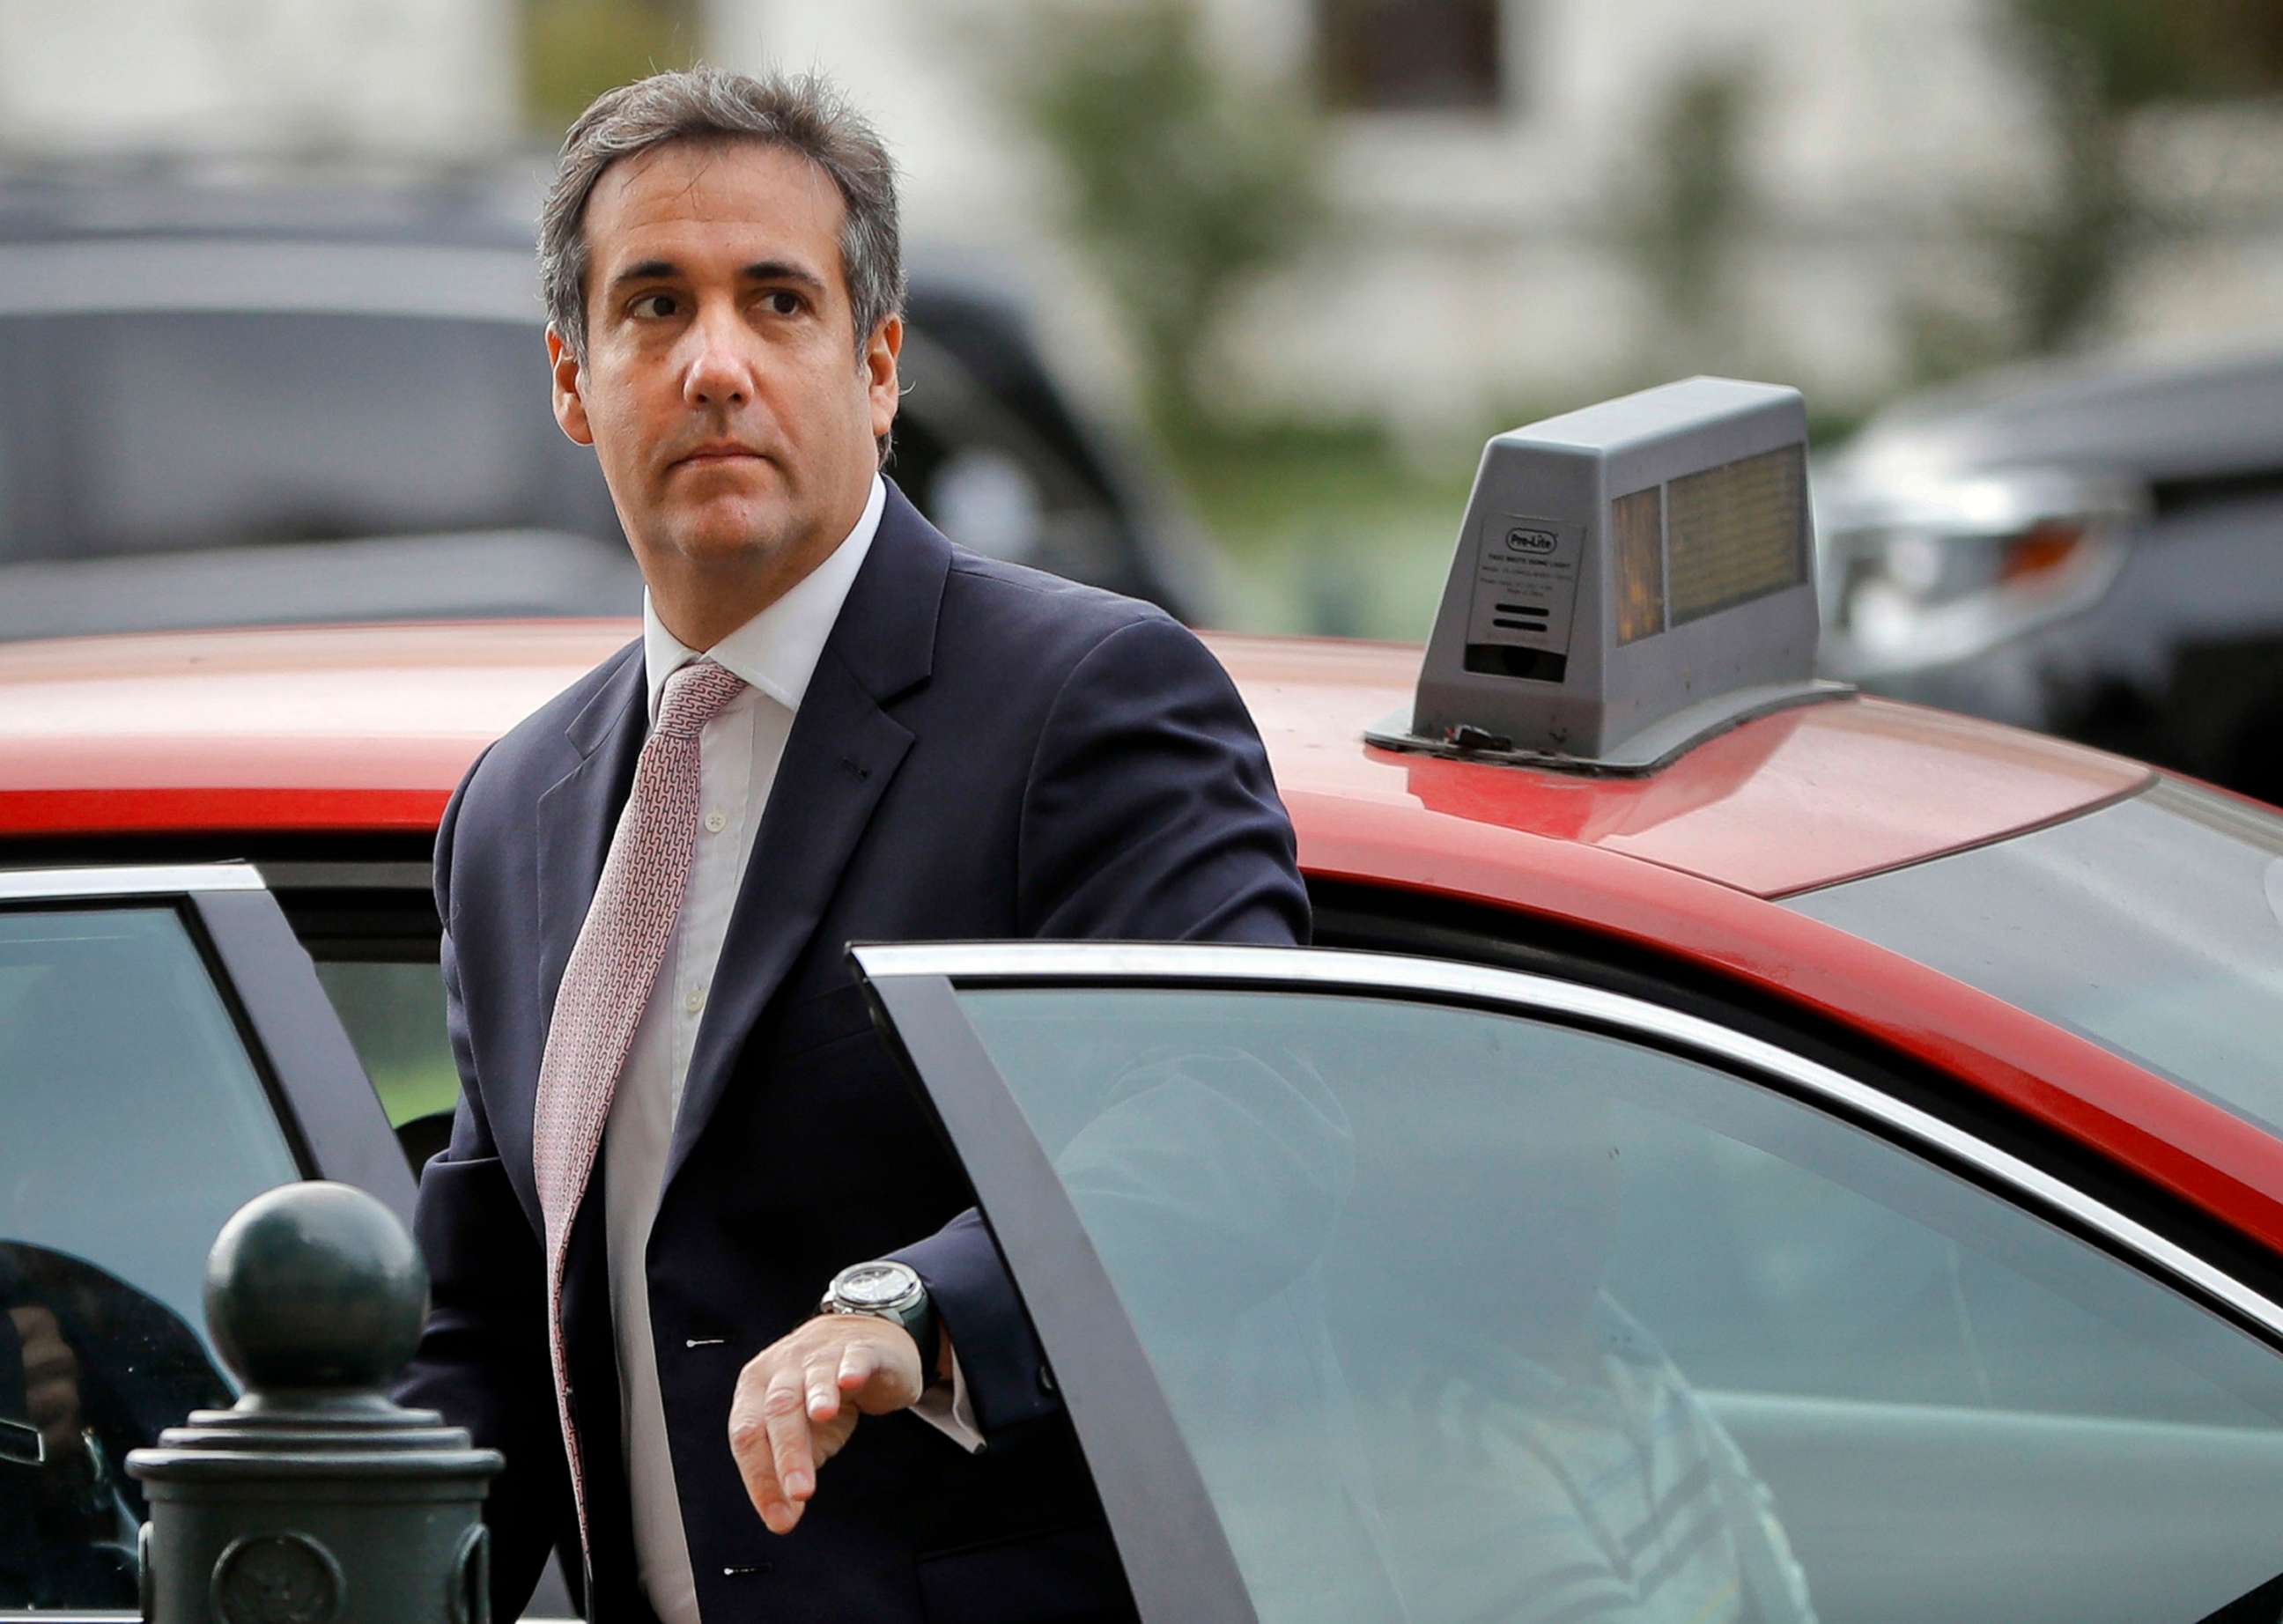 PHOTO: Michael Cohen, President Donald Trump's personal attorney, steps out of a cab on Capitol Hill in Washington, D.C., Sept. 19, 2017.